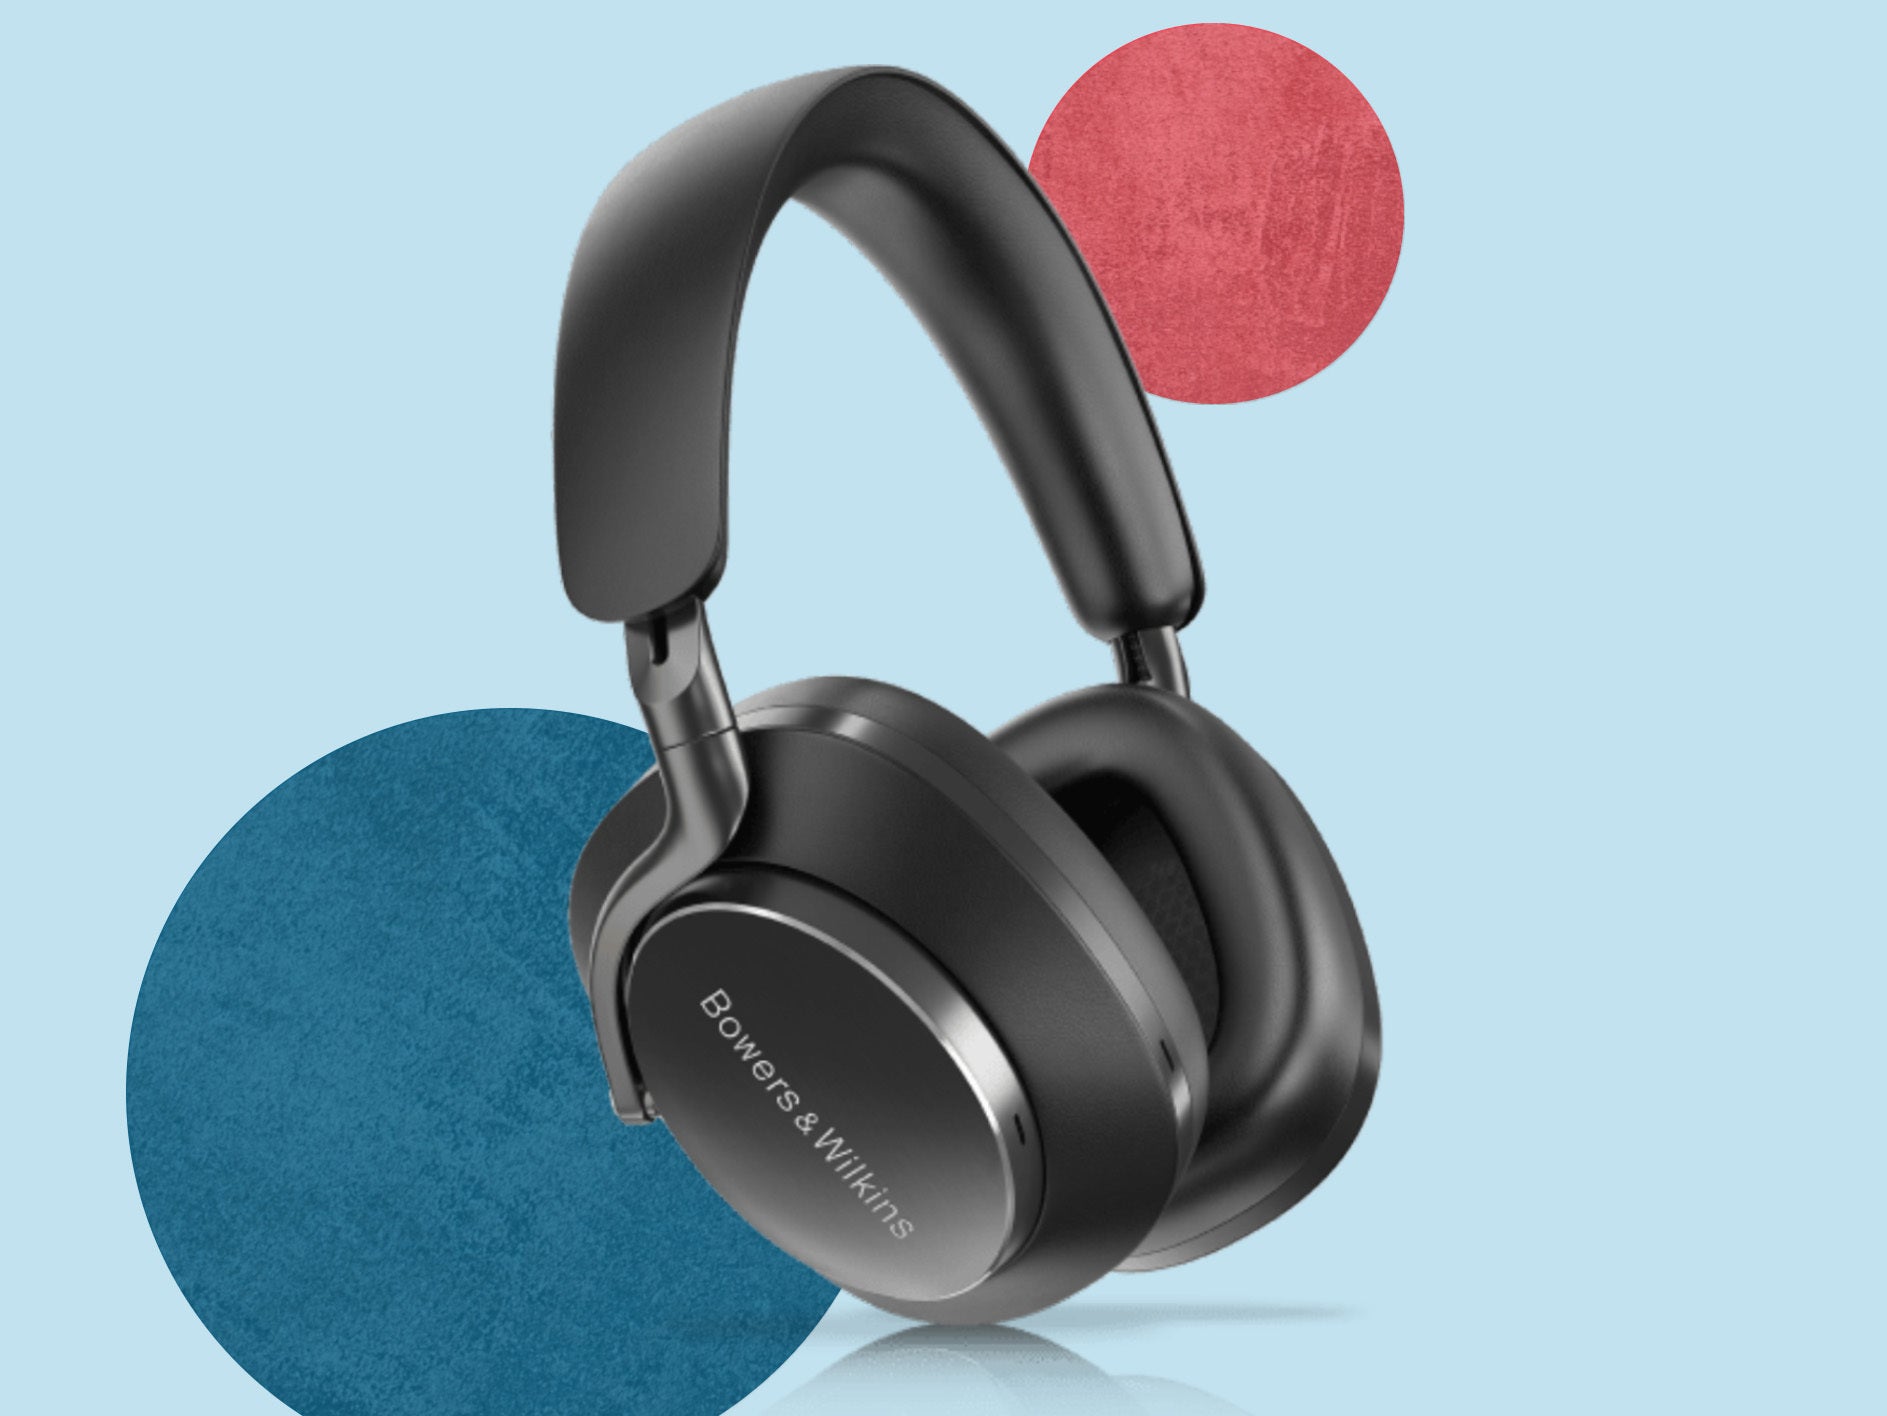 Bowers & Wilkins Px8 review: Premium headphones that sound